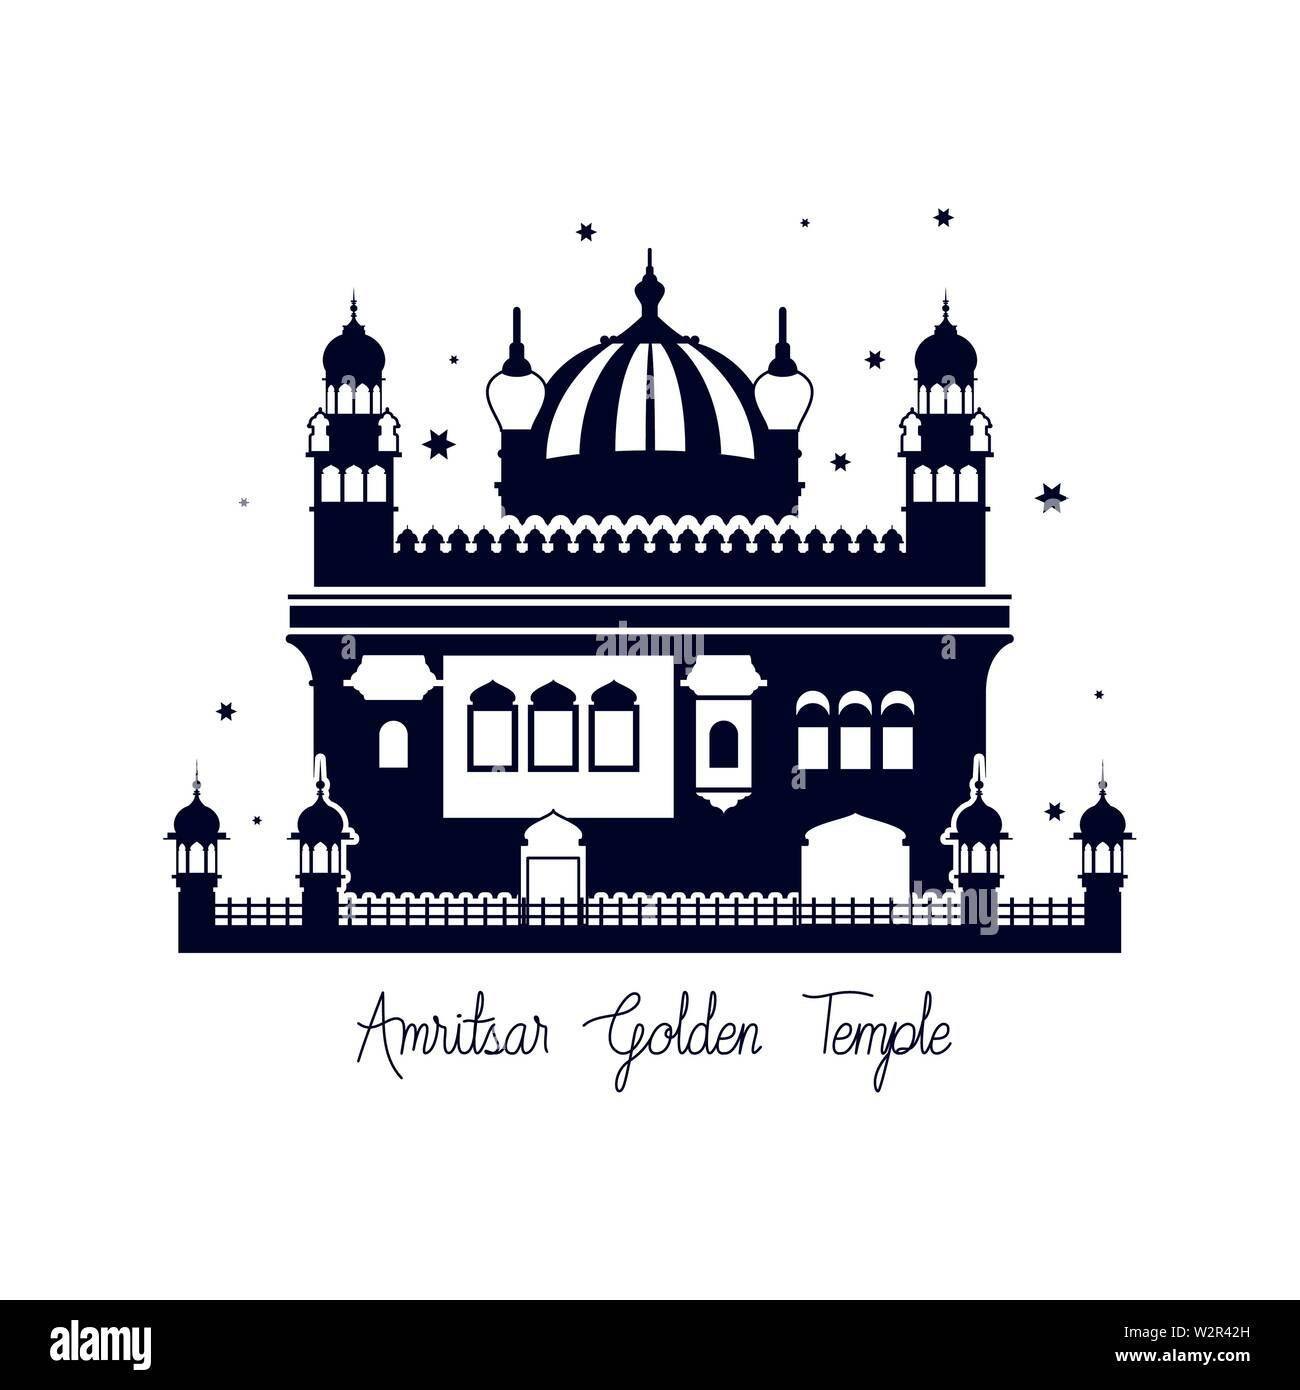 edification of amritsar golden temple and indian independence day vector illustrator Stock Vector